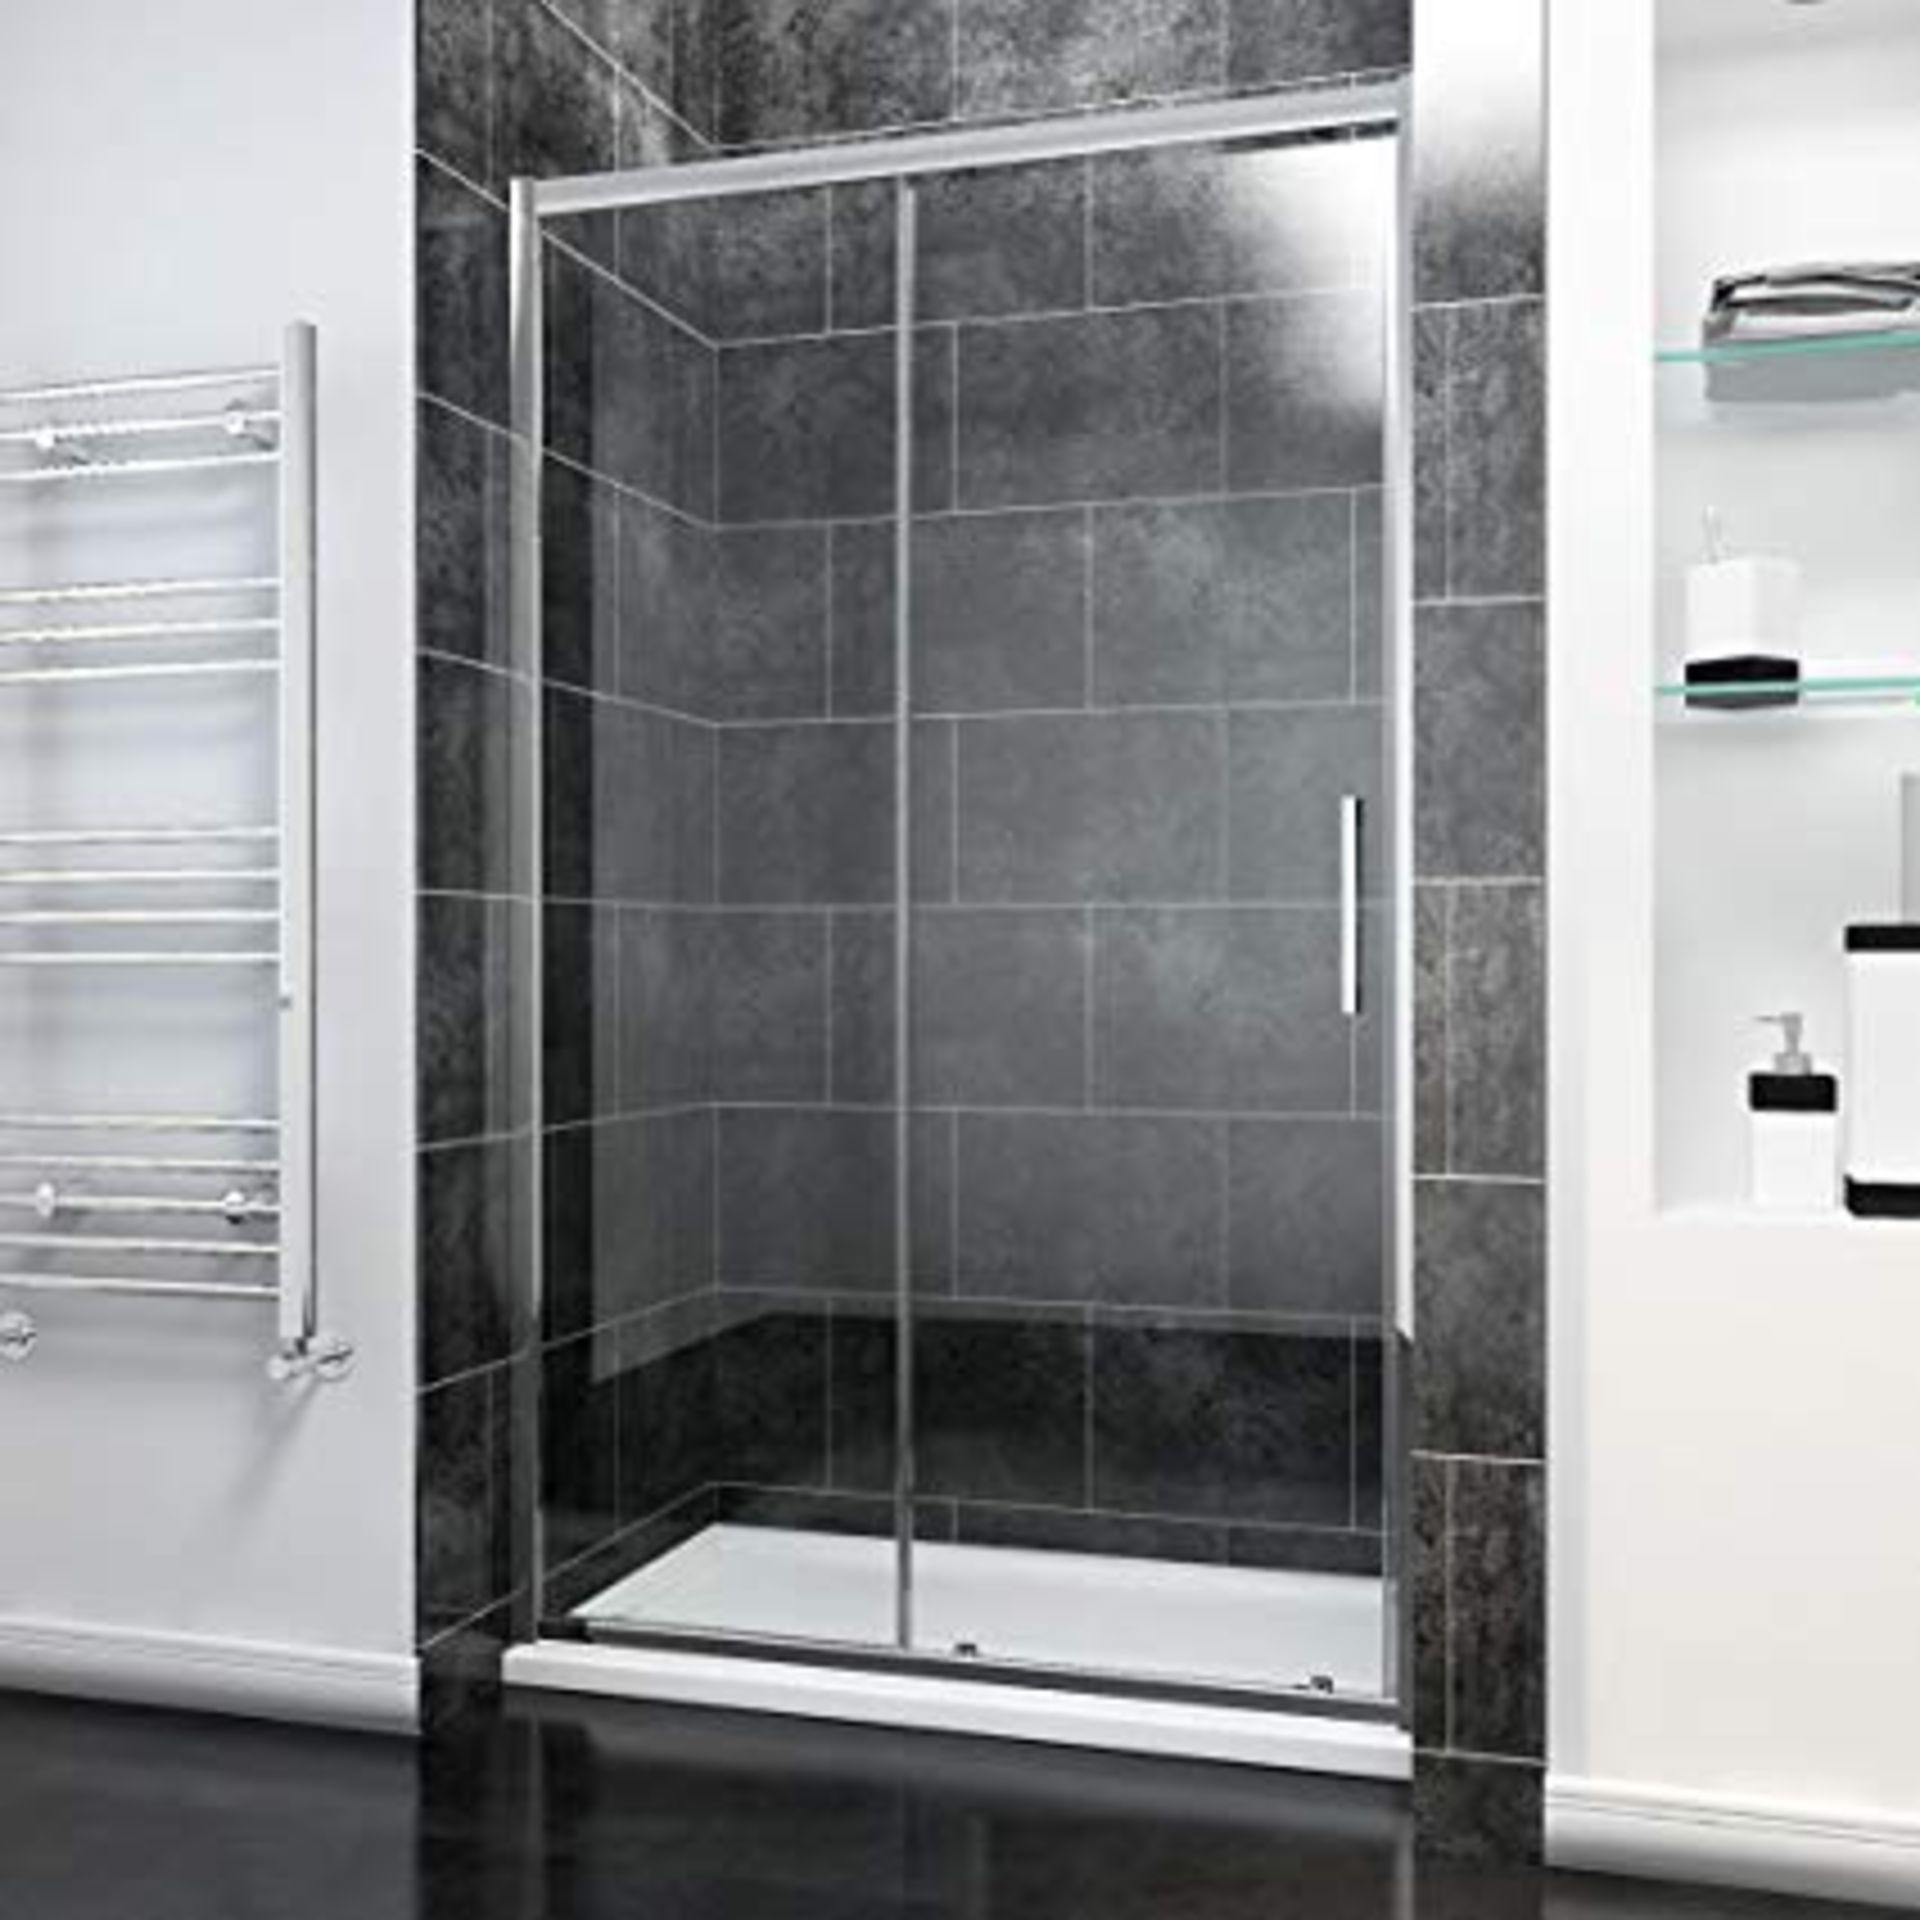 luxury 1400mm shower sliding door unit, new and boxed, RRP £246 - Image 2 of 2